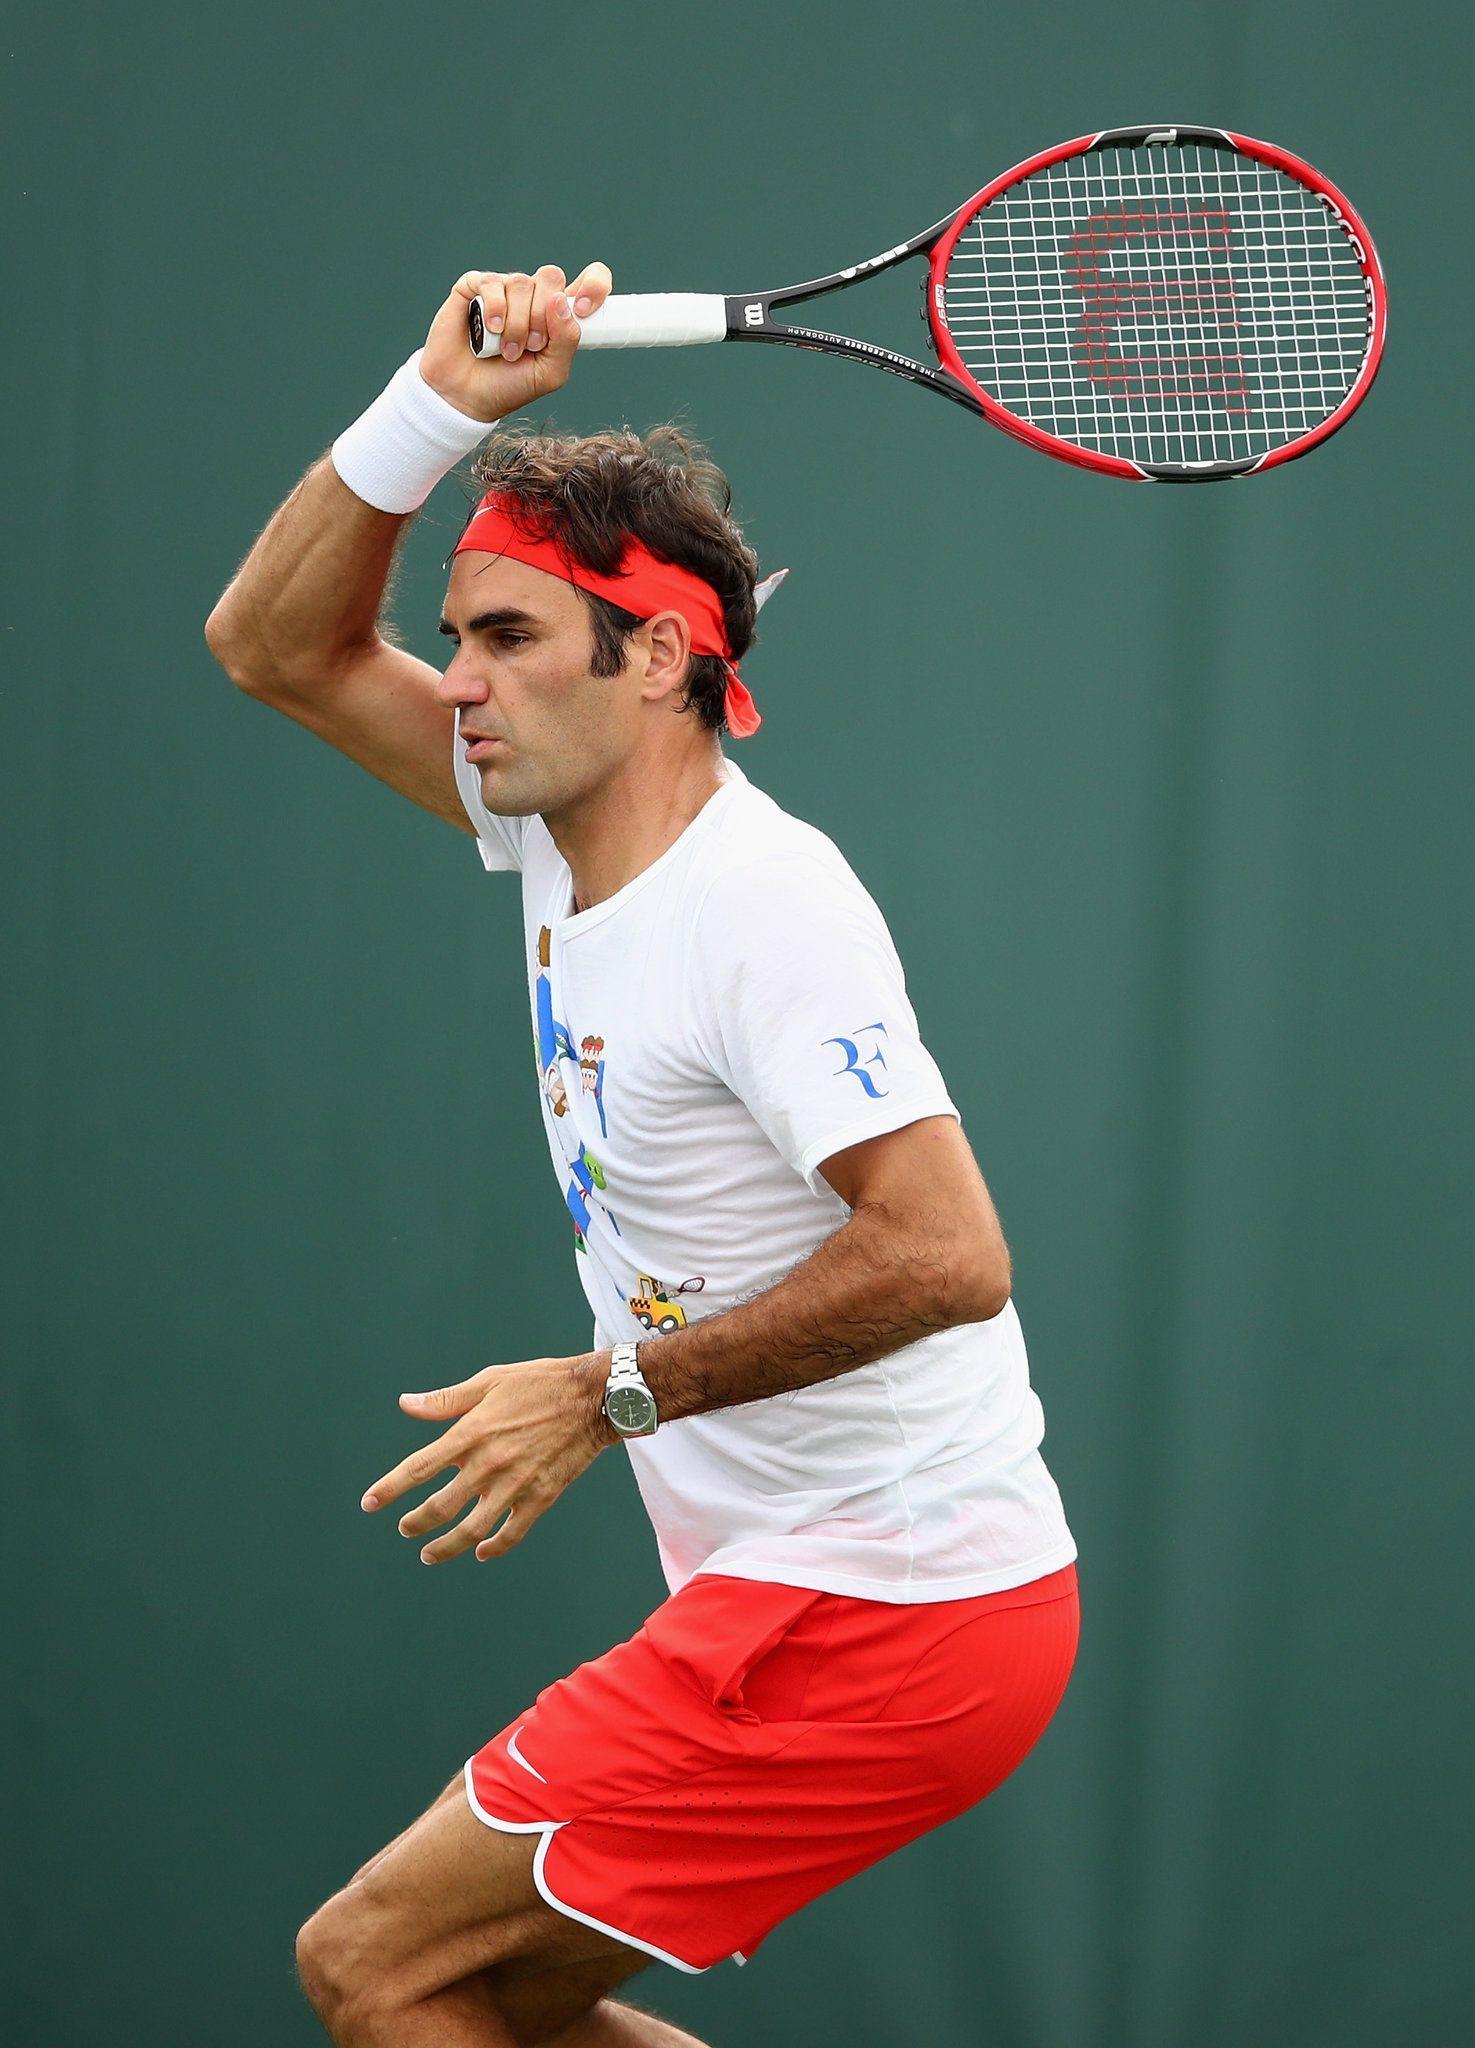 Roger Federer Wallpaper for iPhone iPhone 7 plus, iPhone 6